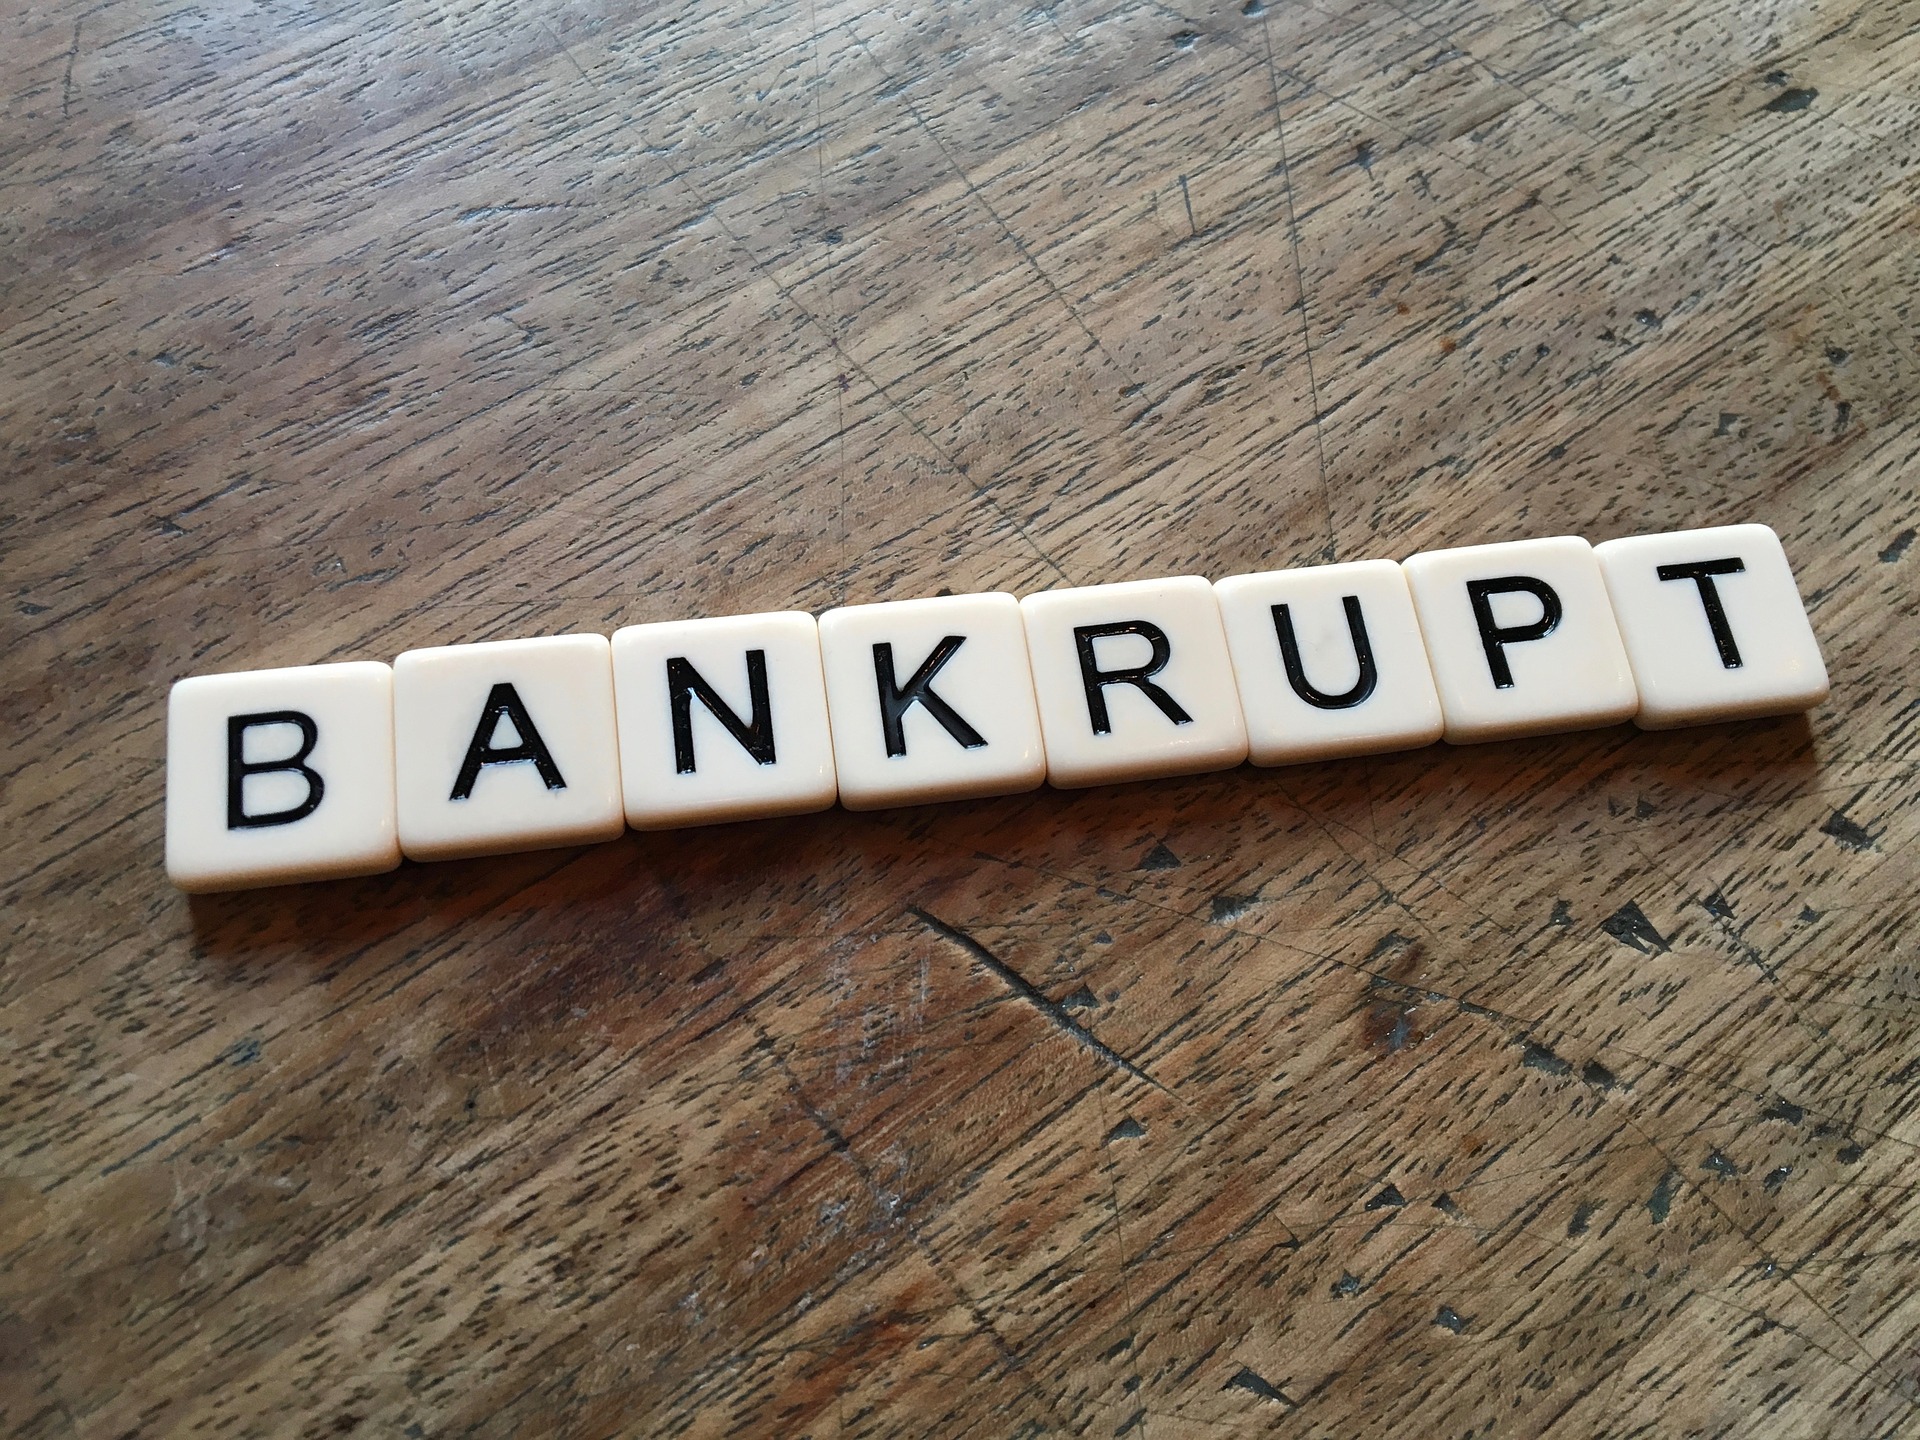 how to file for bankruptcy